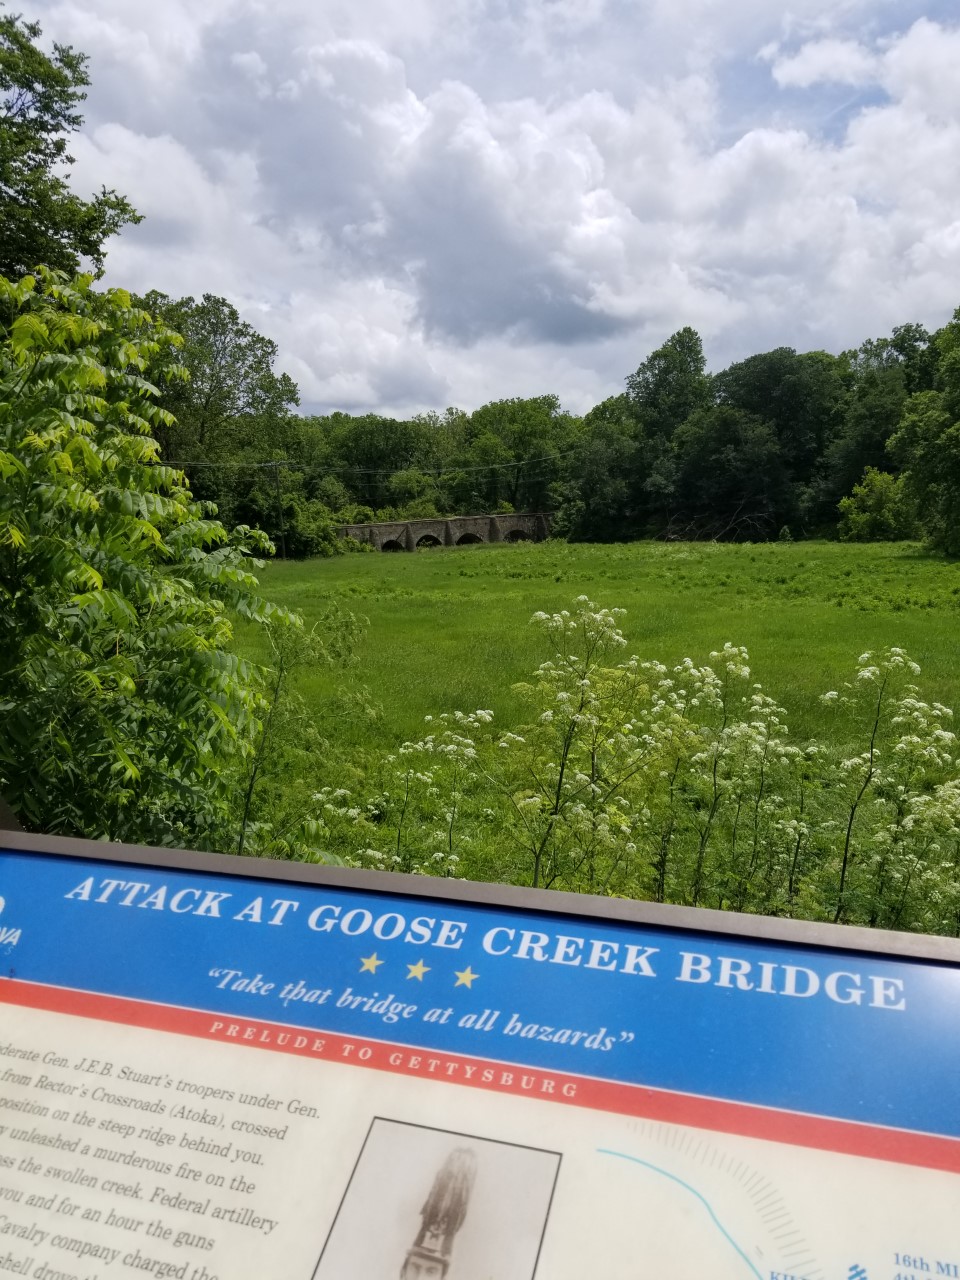 A Historical Markers Stands to Describe the Action at Goose Creek Bridge